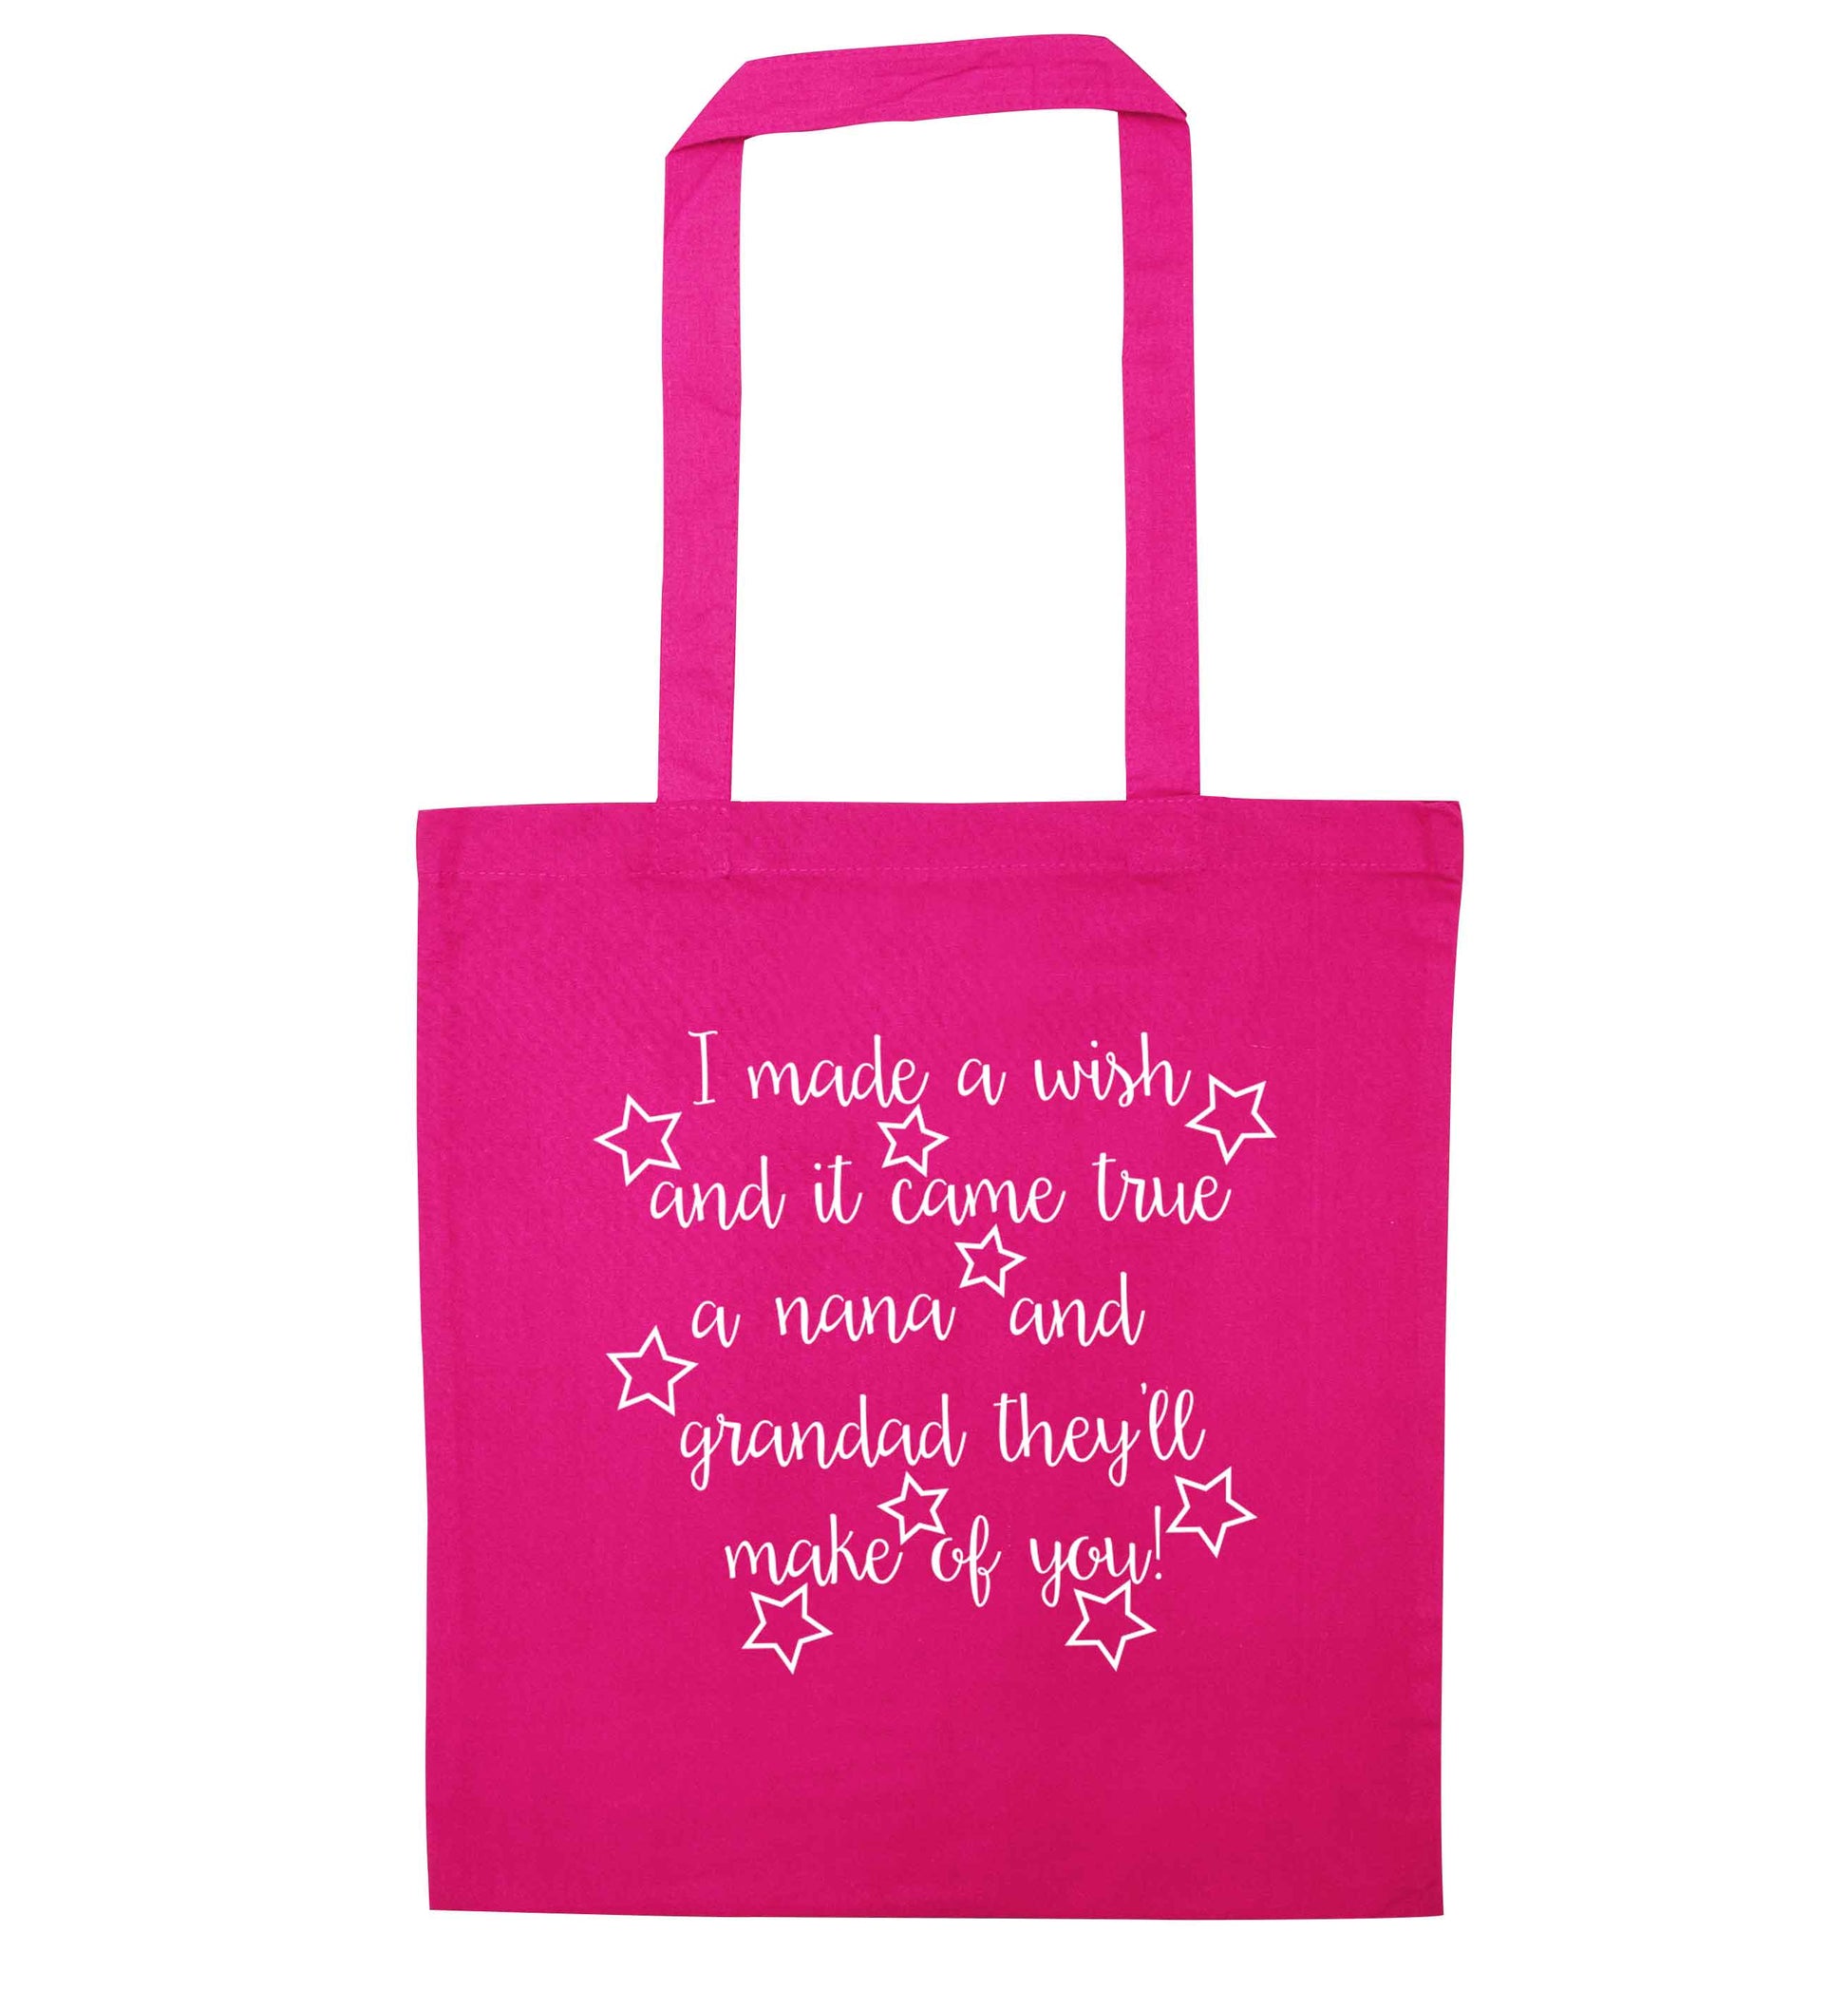 I made a wish and it came true a nana and grandad they'll make of you! pink tote bag